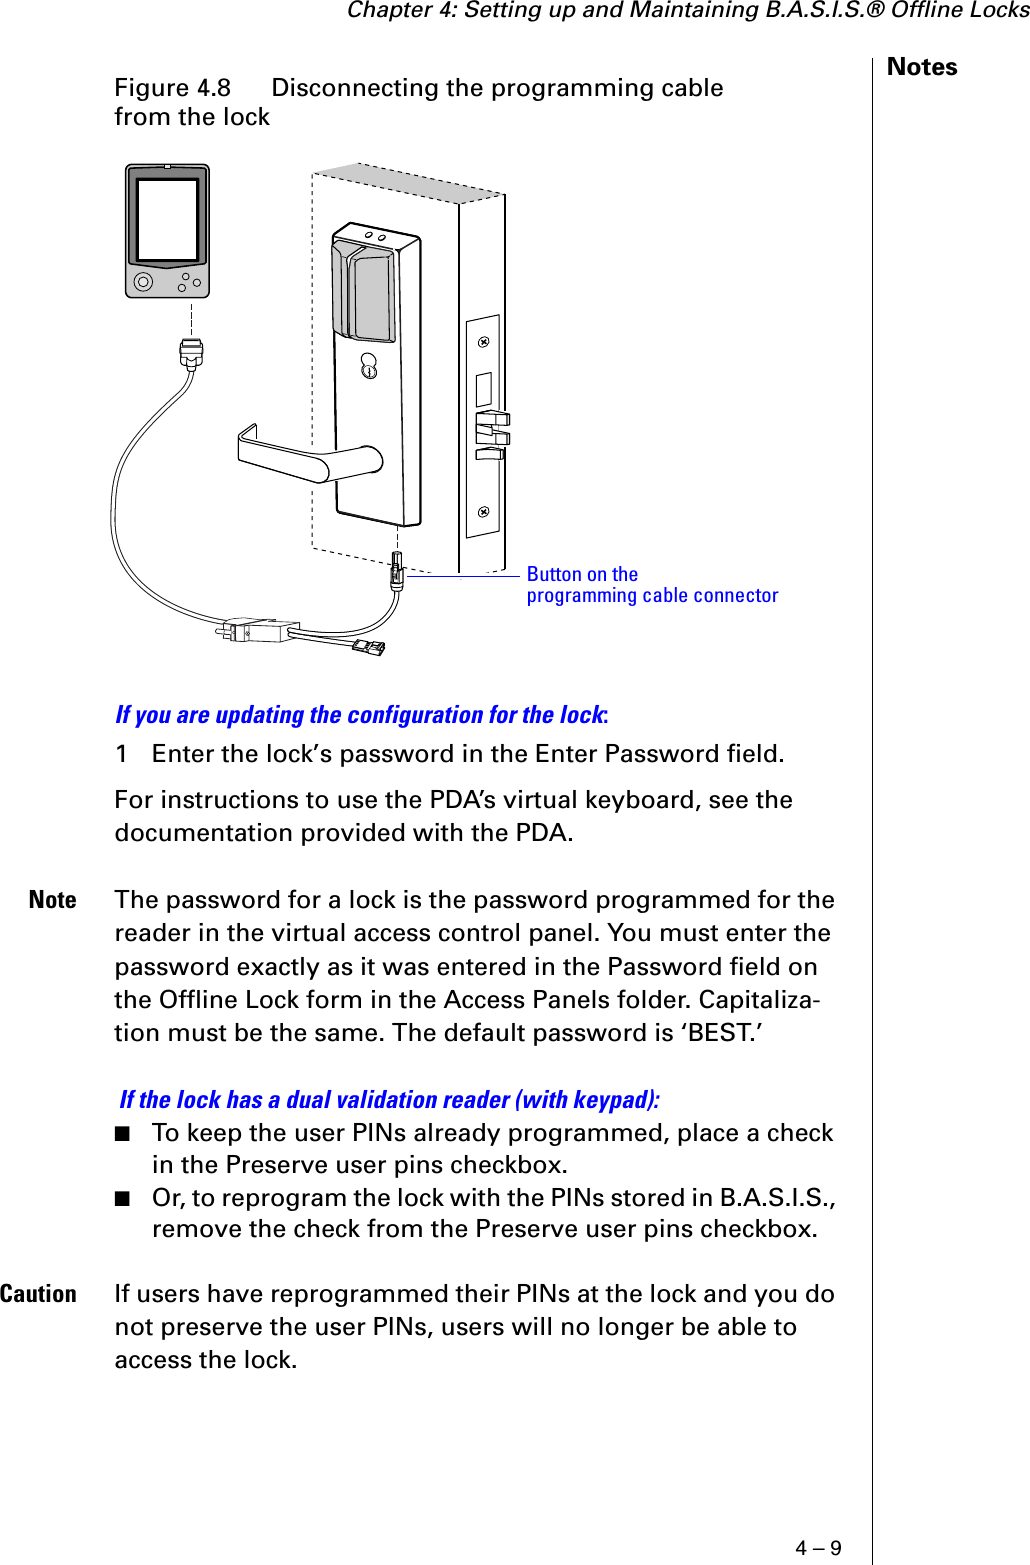 Chapter 4: Setting up and Maintaining B.A.S.I.S.® Offline Locks4 – 9NotesIf you are updating the configuration for the lock:1 Enter the lock’s password in the Enter Password field.For instructions to use the PDA’s virtual keyboard, see the documentation provided with the PDA.Note The password for a lock is the password programmed for the reader in the virtual access control panel. You must enter the password exactly as it was entered in the Password field on the Offline Lock form in the Access Panels folder. Capitaliza-tion must be the same. The default password is ‘BEST.’ If the lock has a dual validation reader (with keypad):■To keep the user PINs already programmed, place a check in the Preserve user pins checkbox.■Or, to reprogram the lock with the PINs stored in B.A.S.I.S., remove the check from the Preserve user pins checkbox.Caution If users have reprogrammed their PINs at the lock and you do not preserve the user PINs, users will no longer be able to access the lock.Figure 4.8  Disconnecting the programming cable from the lockButton on theprogramming cable connector